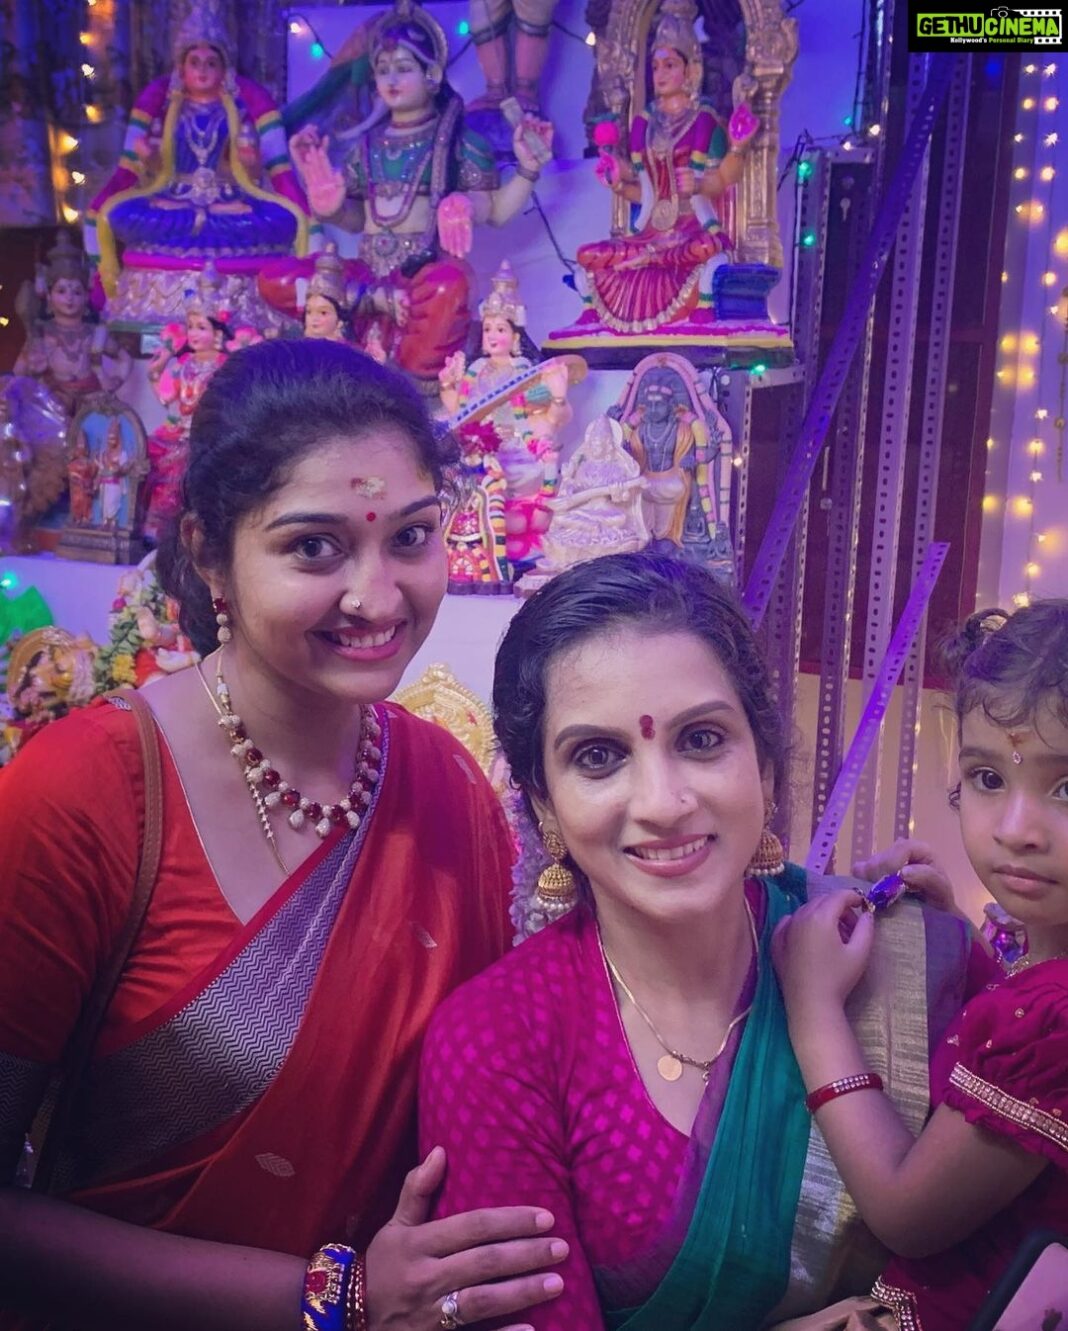 Neelima Rani Instagram - Navarathri celebrations at @ammuramachandran house!! Felt so good to visit friends during this pandemic and spread some care towards each other! Aditi accompanied me 🥰 Beautiful saree by @thari_weaves